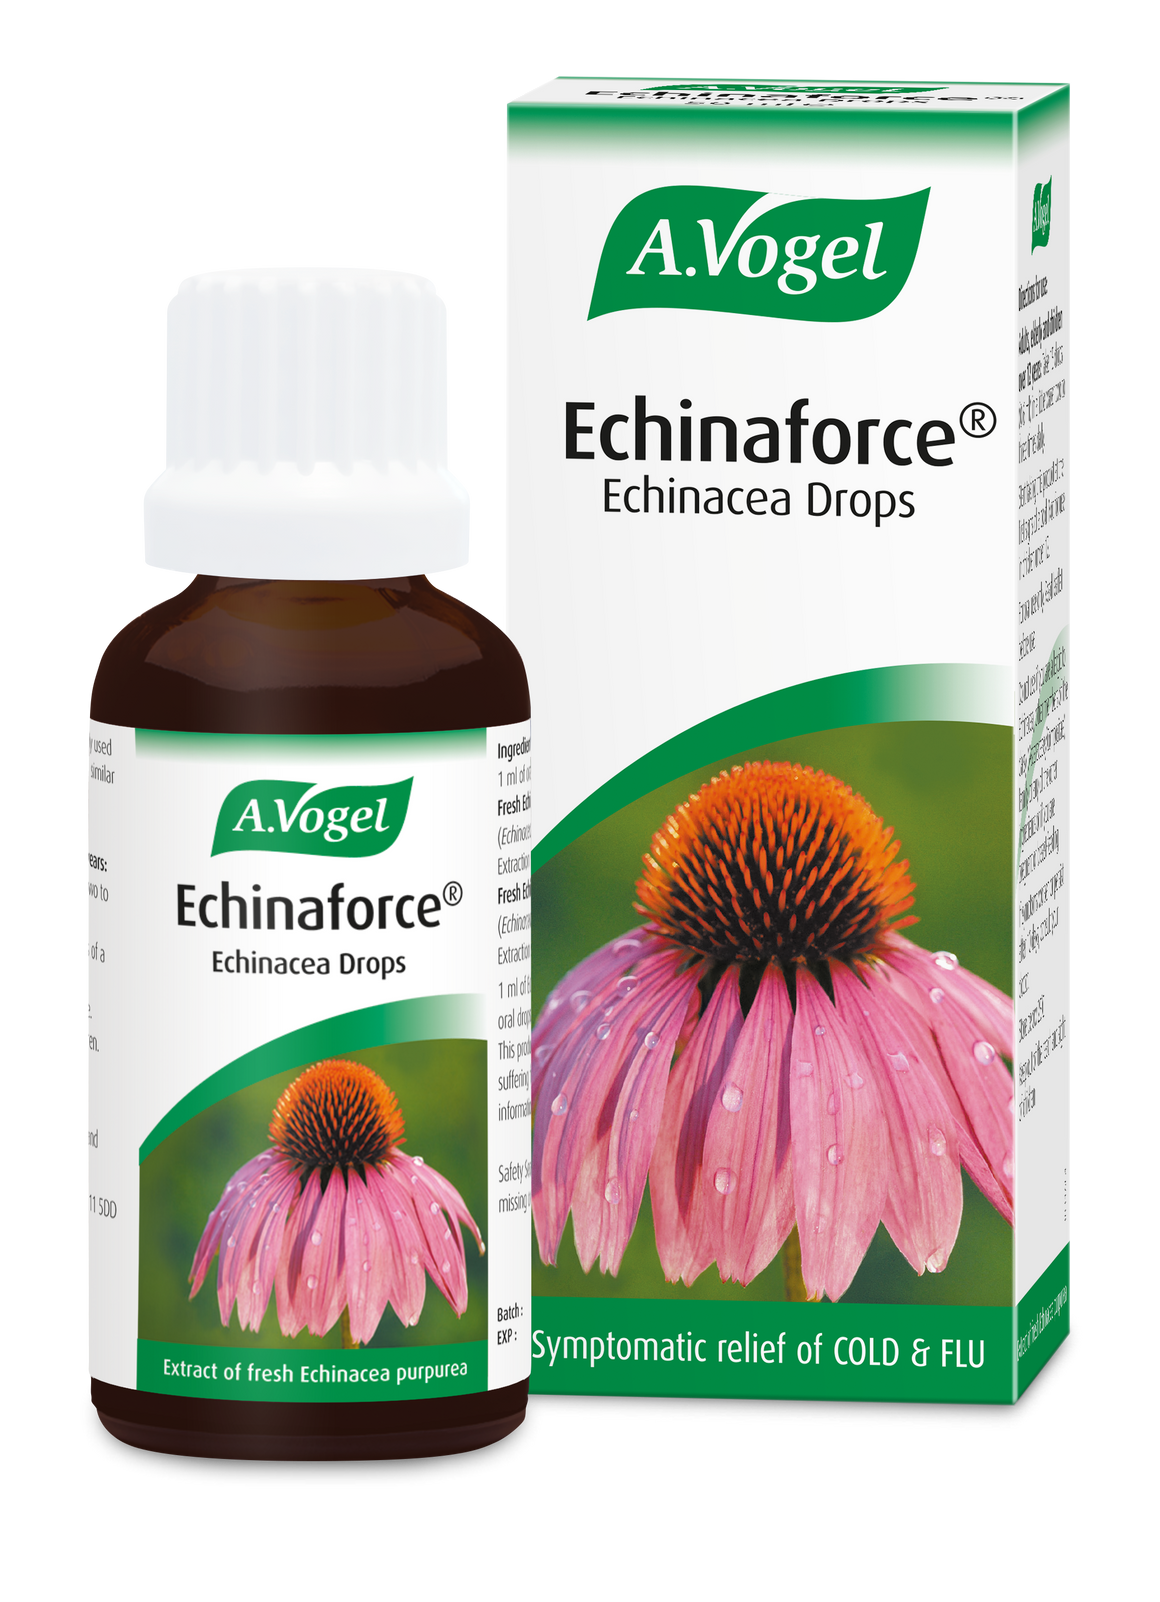 Echinaforce® - Echinacea Drops 50ml Helps fight symptoms of colds & Flu by strengthening your immune system.